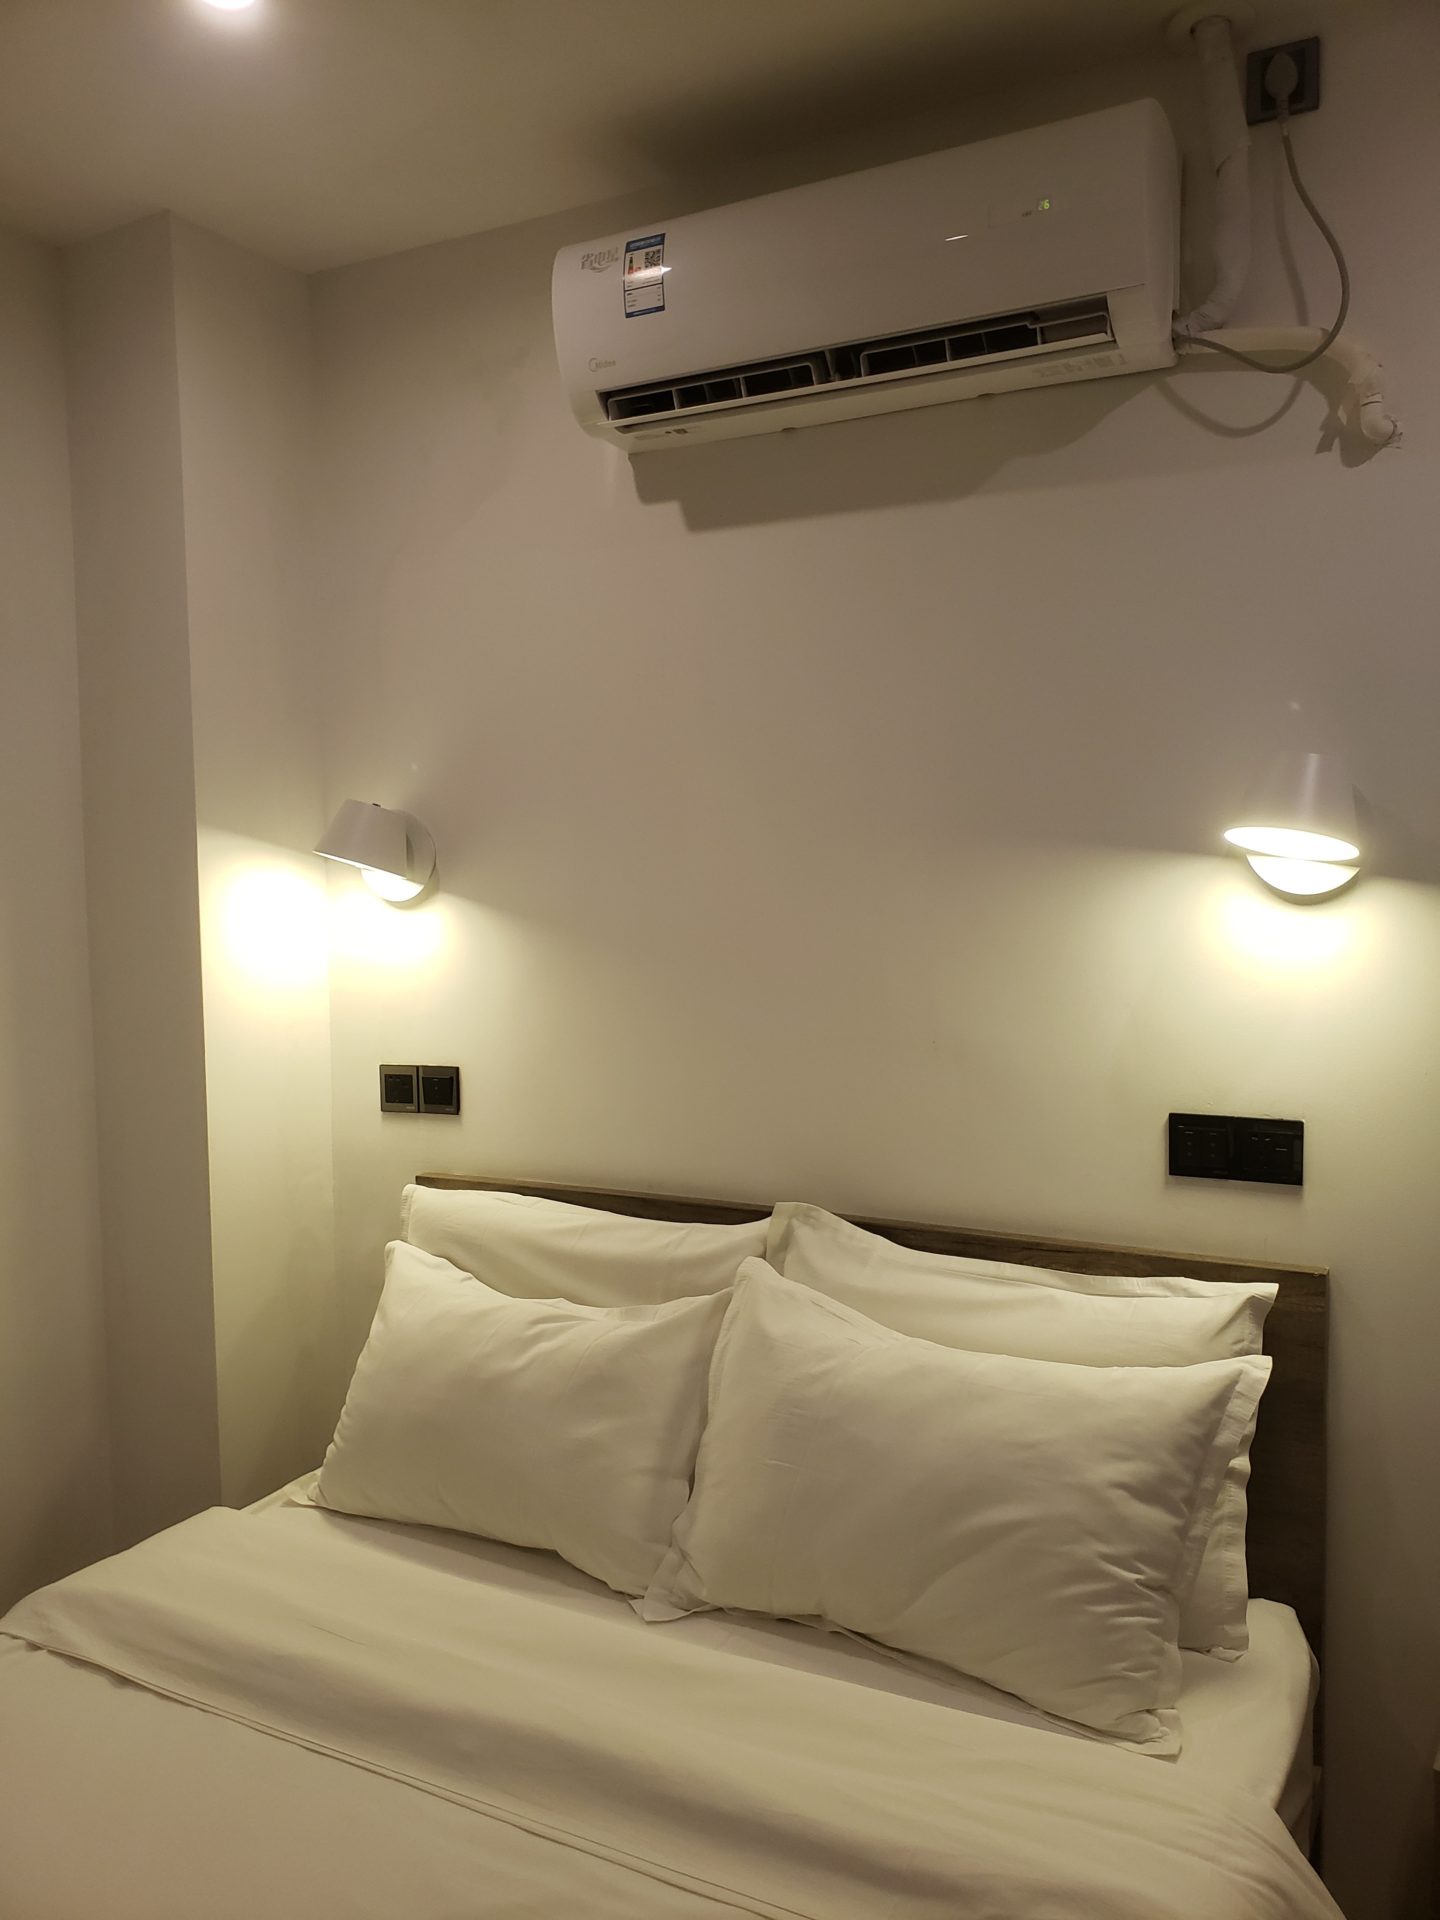 a bed with pillows and a air conditioner above it